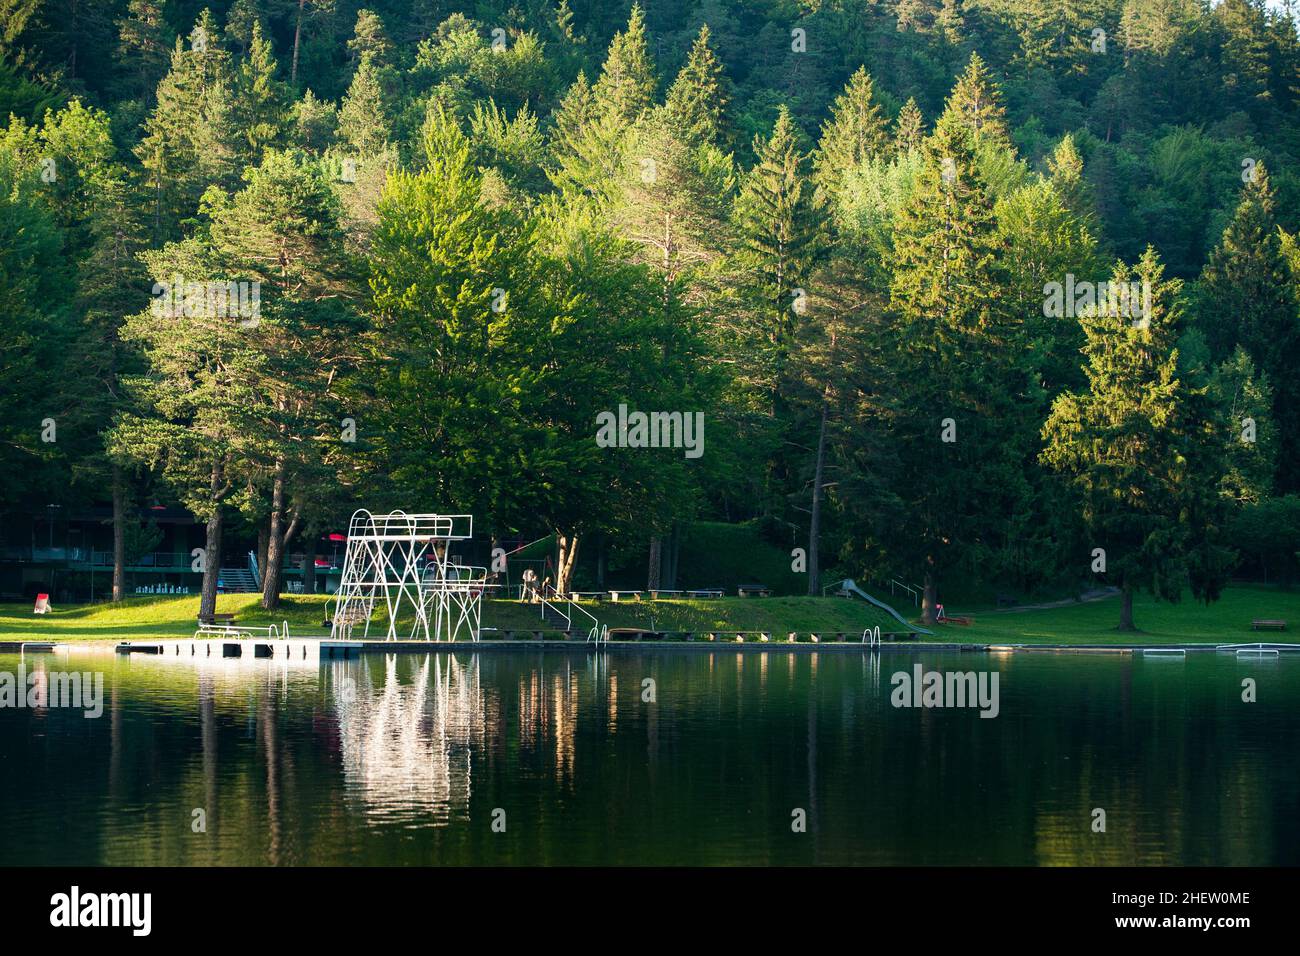 diving platform at swim lake in midden of green forest and nature Stock Photo